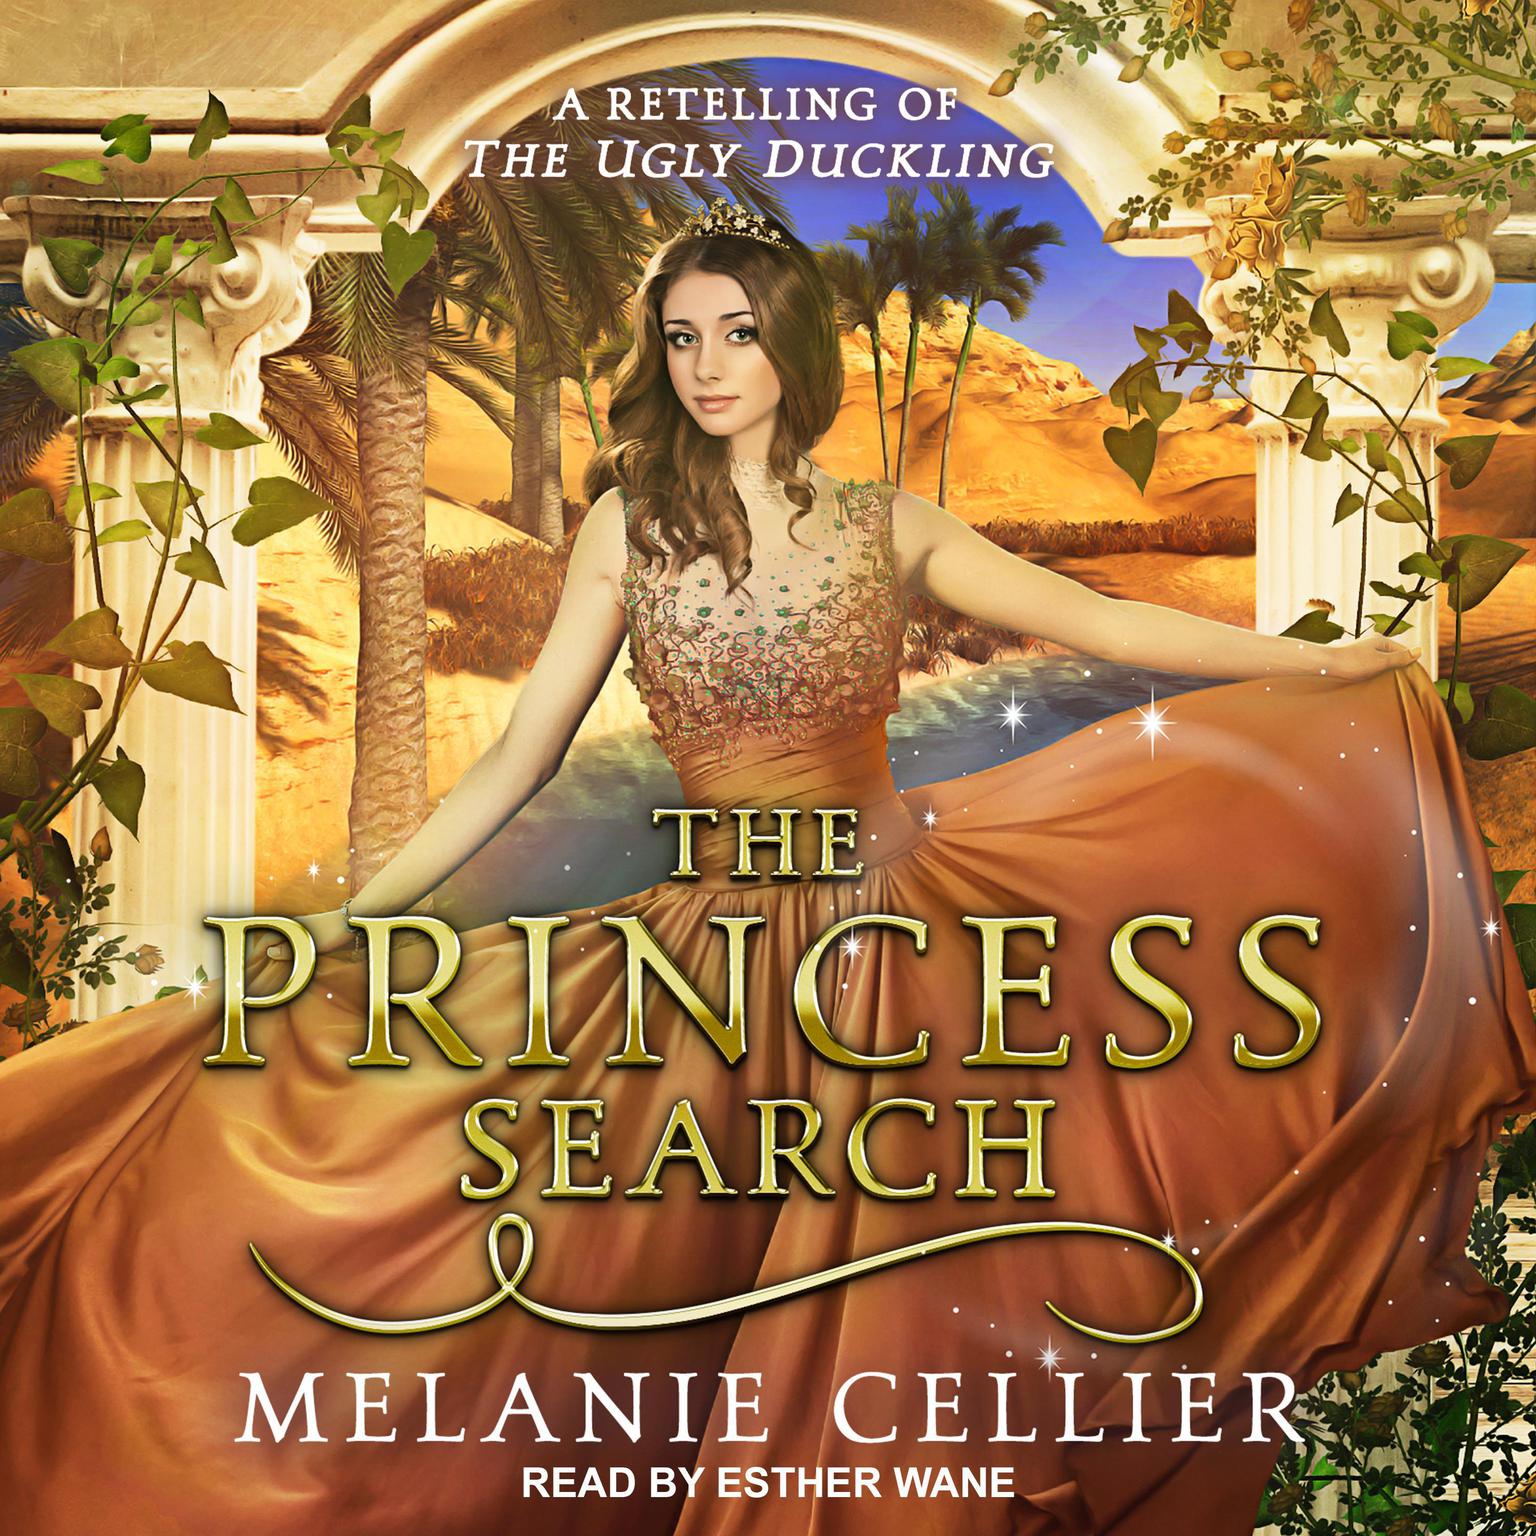 The Princess Search: A Retelling of The Ugly Duckling Audiobook, by Melanie Cellier